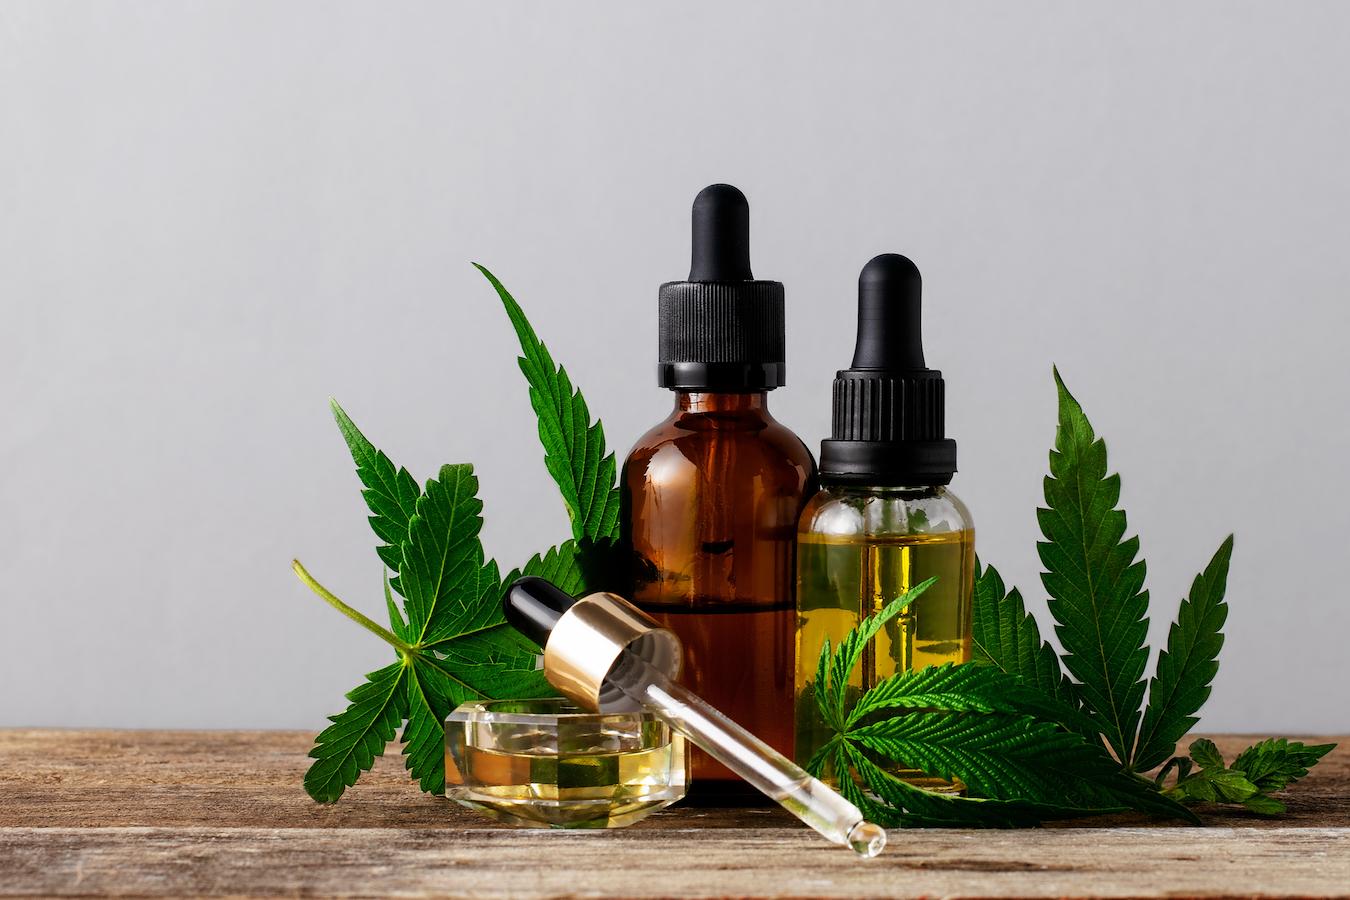 various glass bottles of cbd oil desired effect studies suggest more cbd works lower dose higher doses amount of cbd oil cbd dosages cancer related pain how much cbd oil cbd market how much cbd to relax